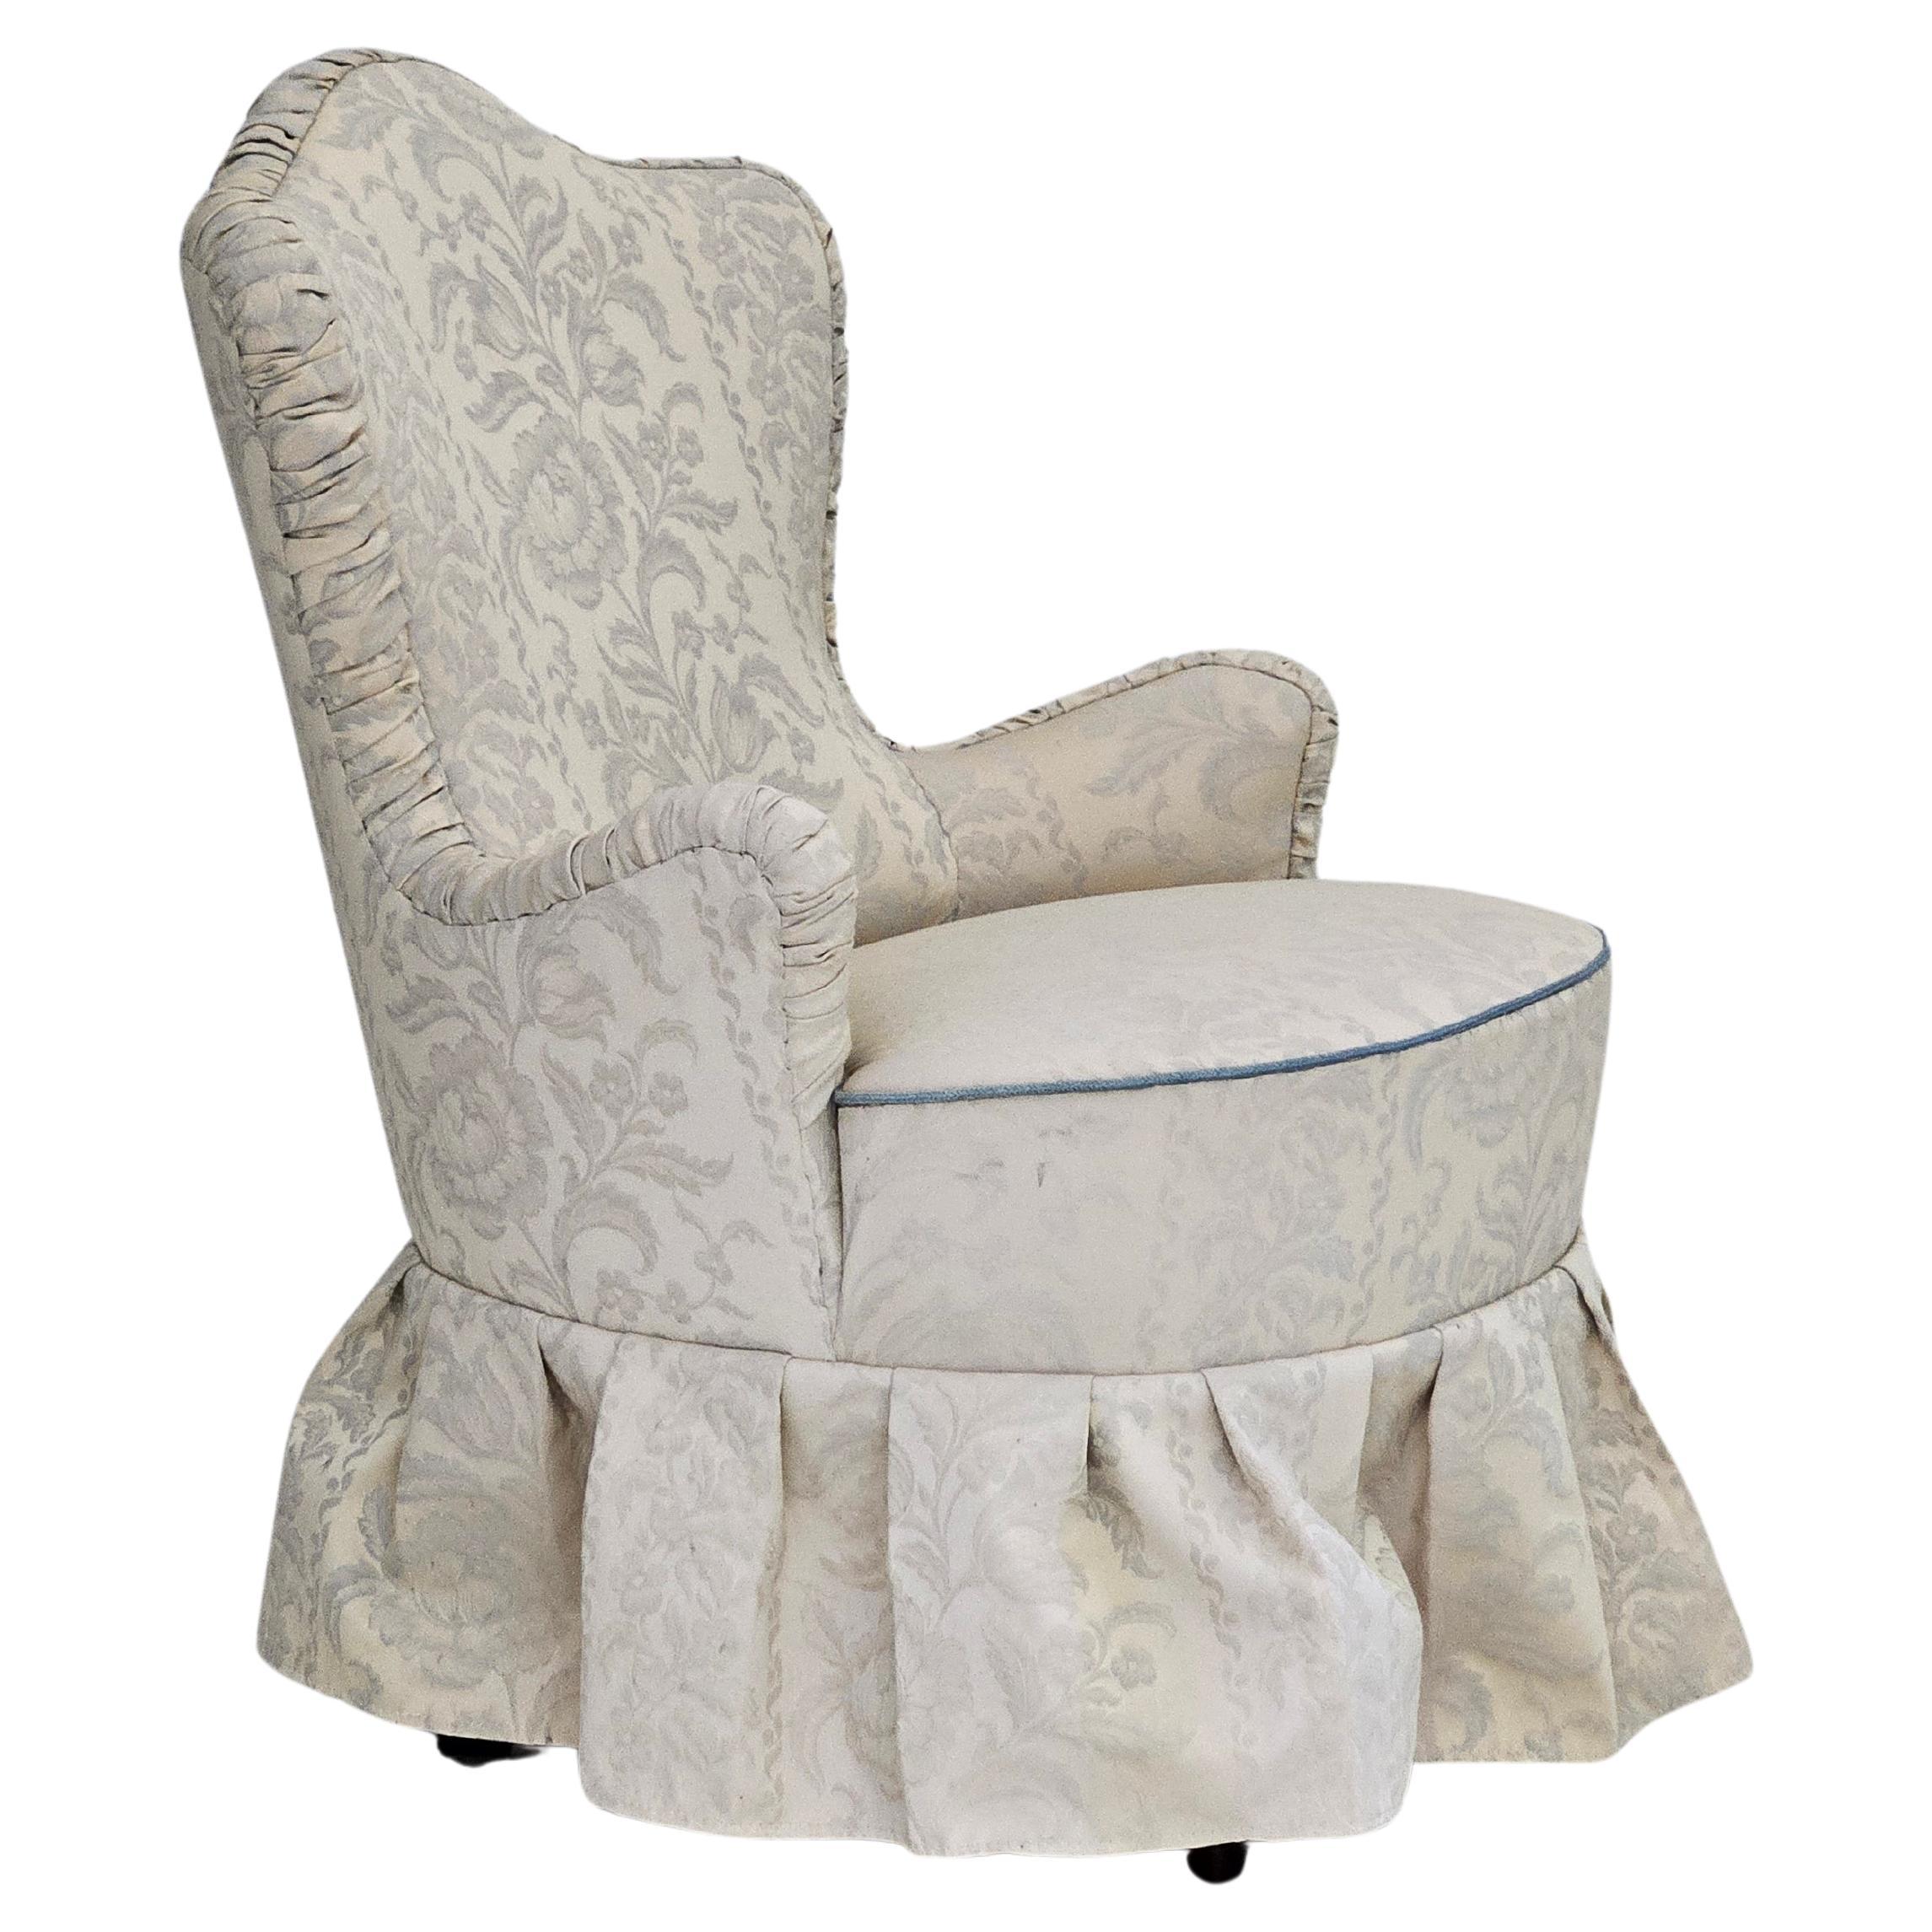 1950s, fauteuil Whiting, reupholstered, creamy/white floral fabric. en vente